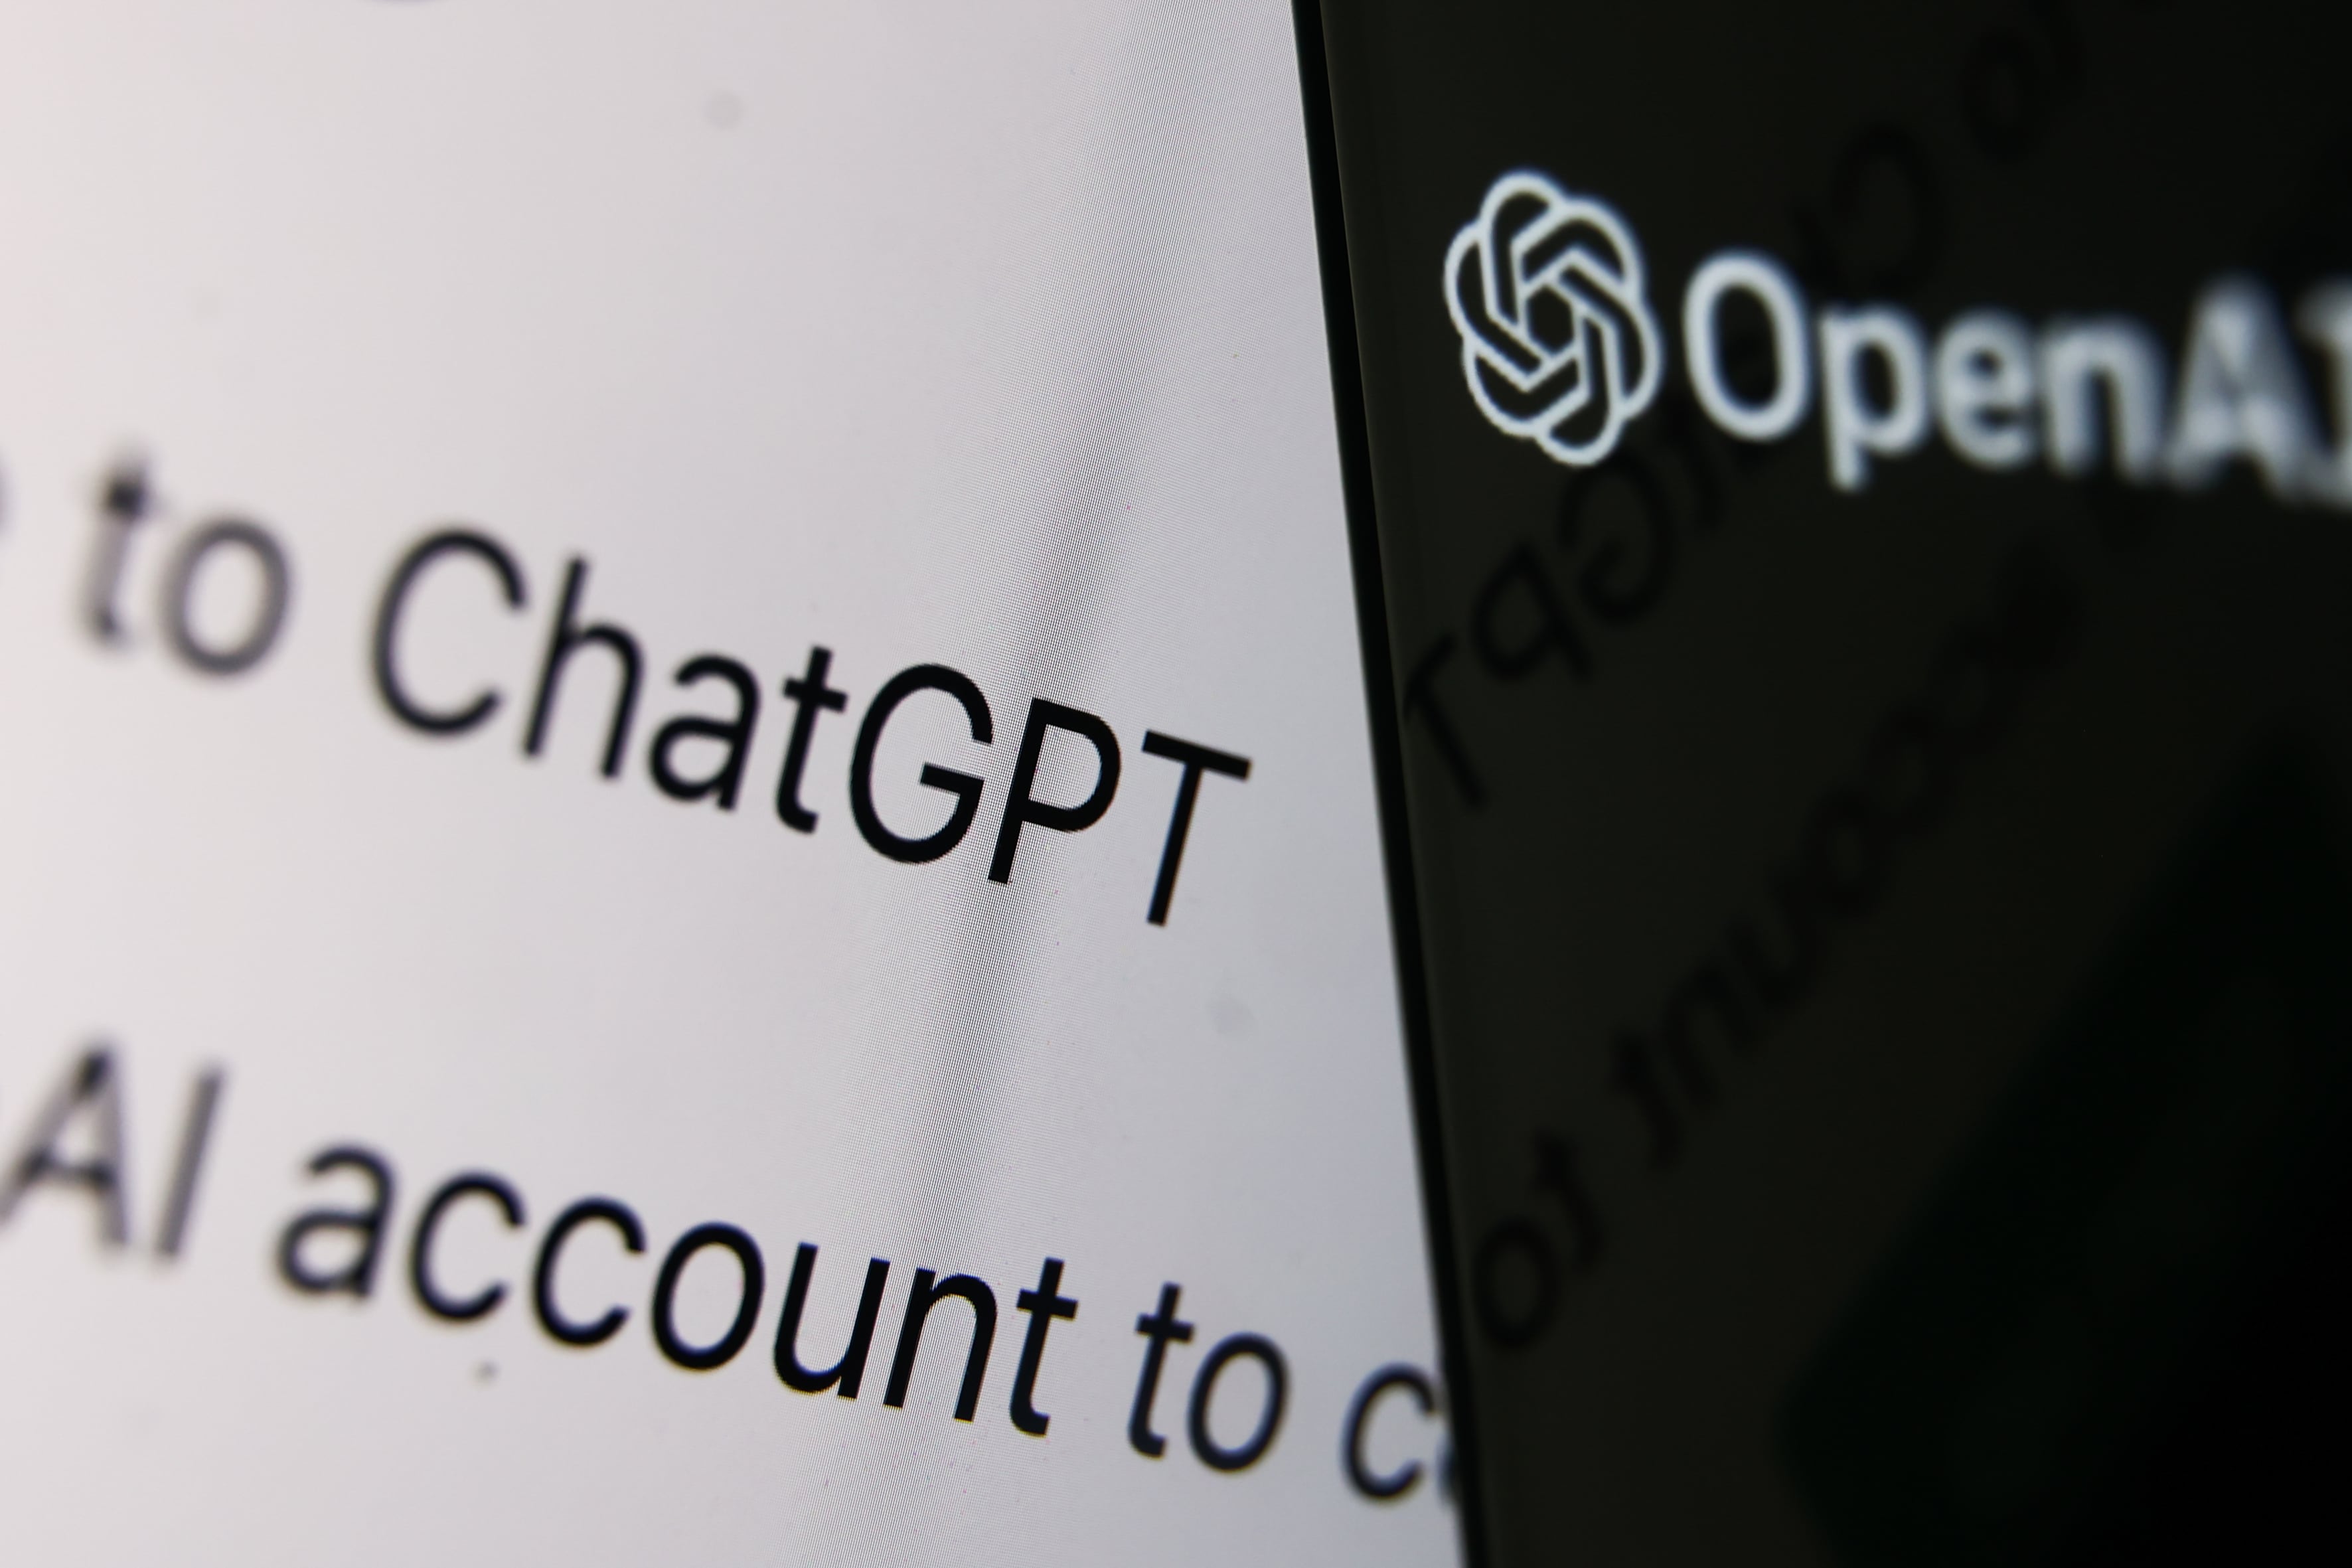 Black and white lettering reading “ChatGPT” and “OpenAI”